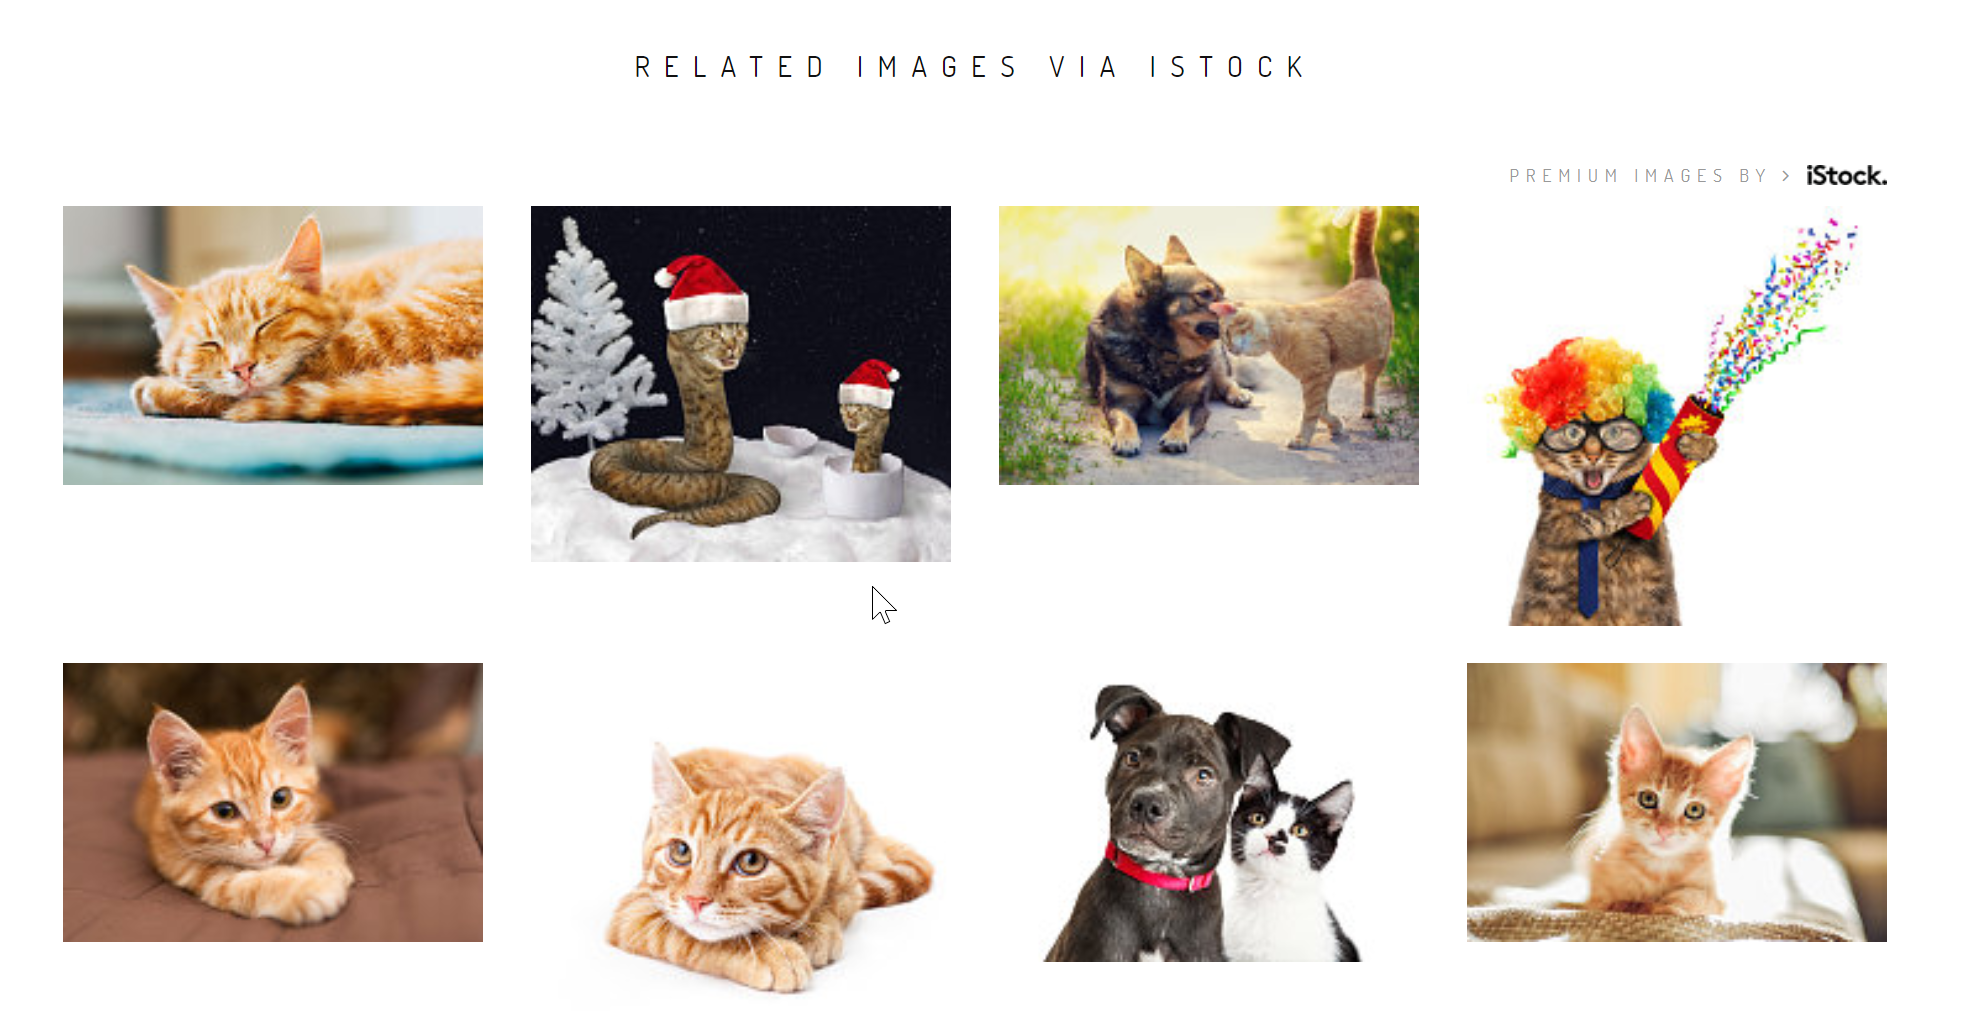 Where to find free stock photos online - Related Images